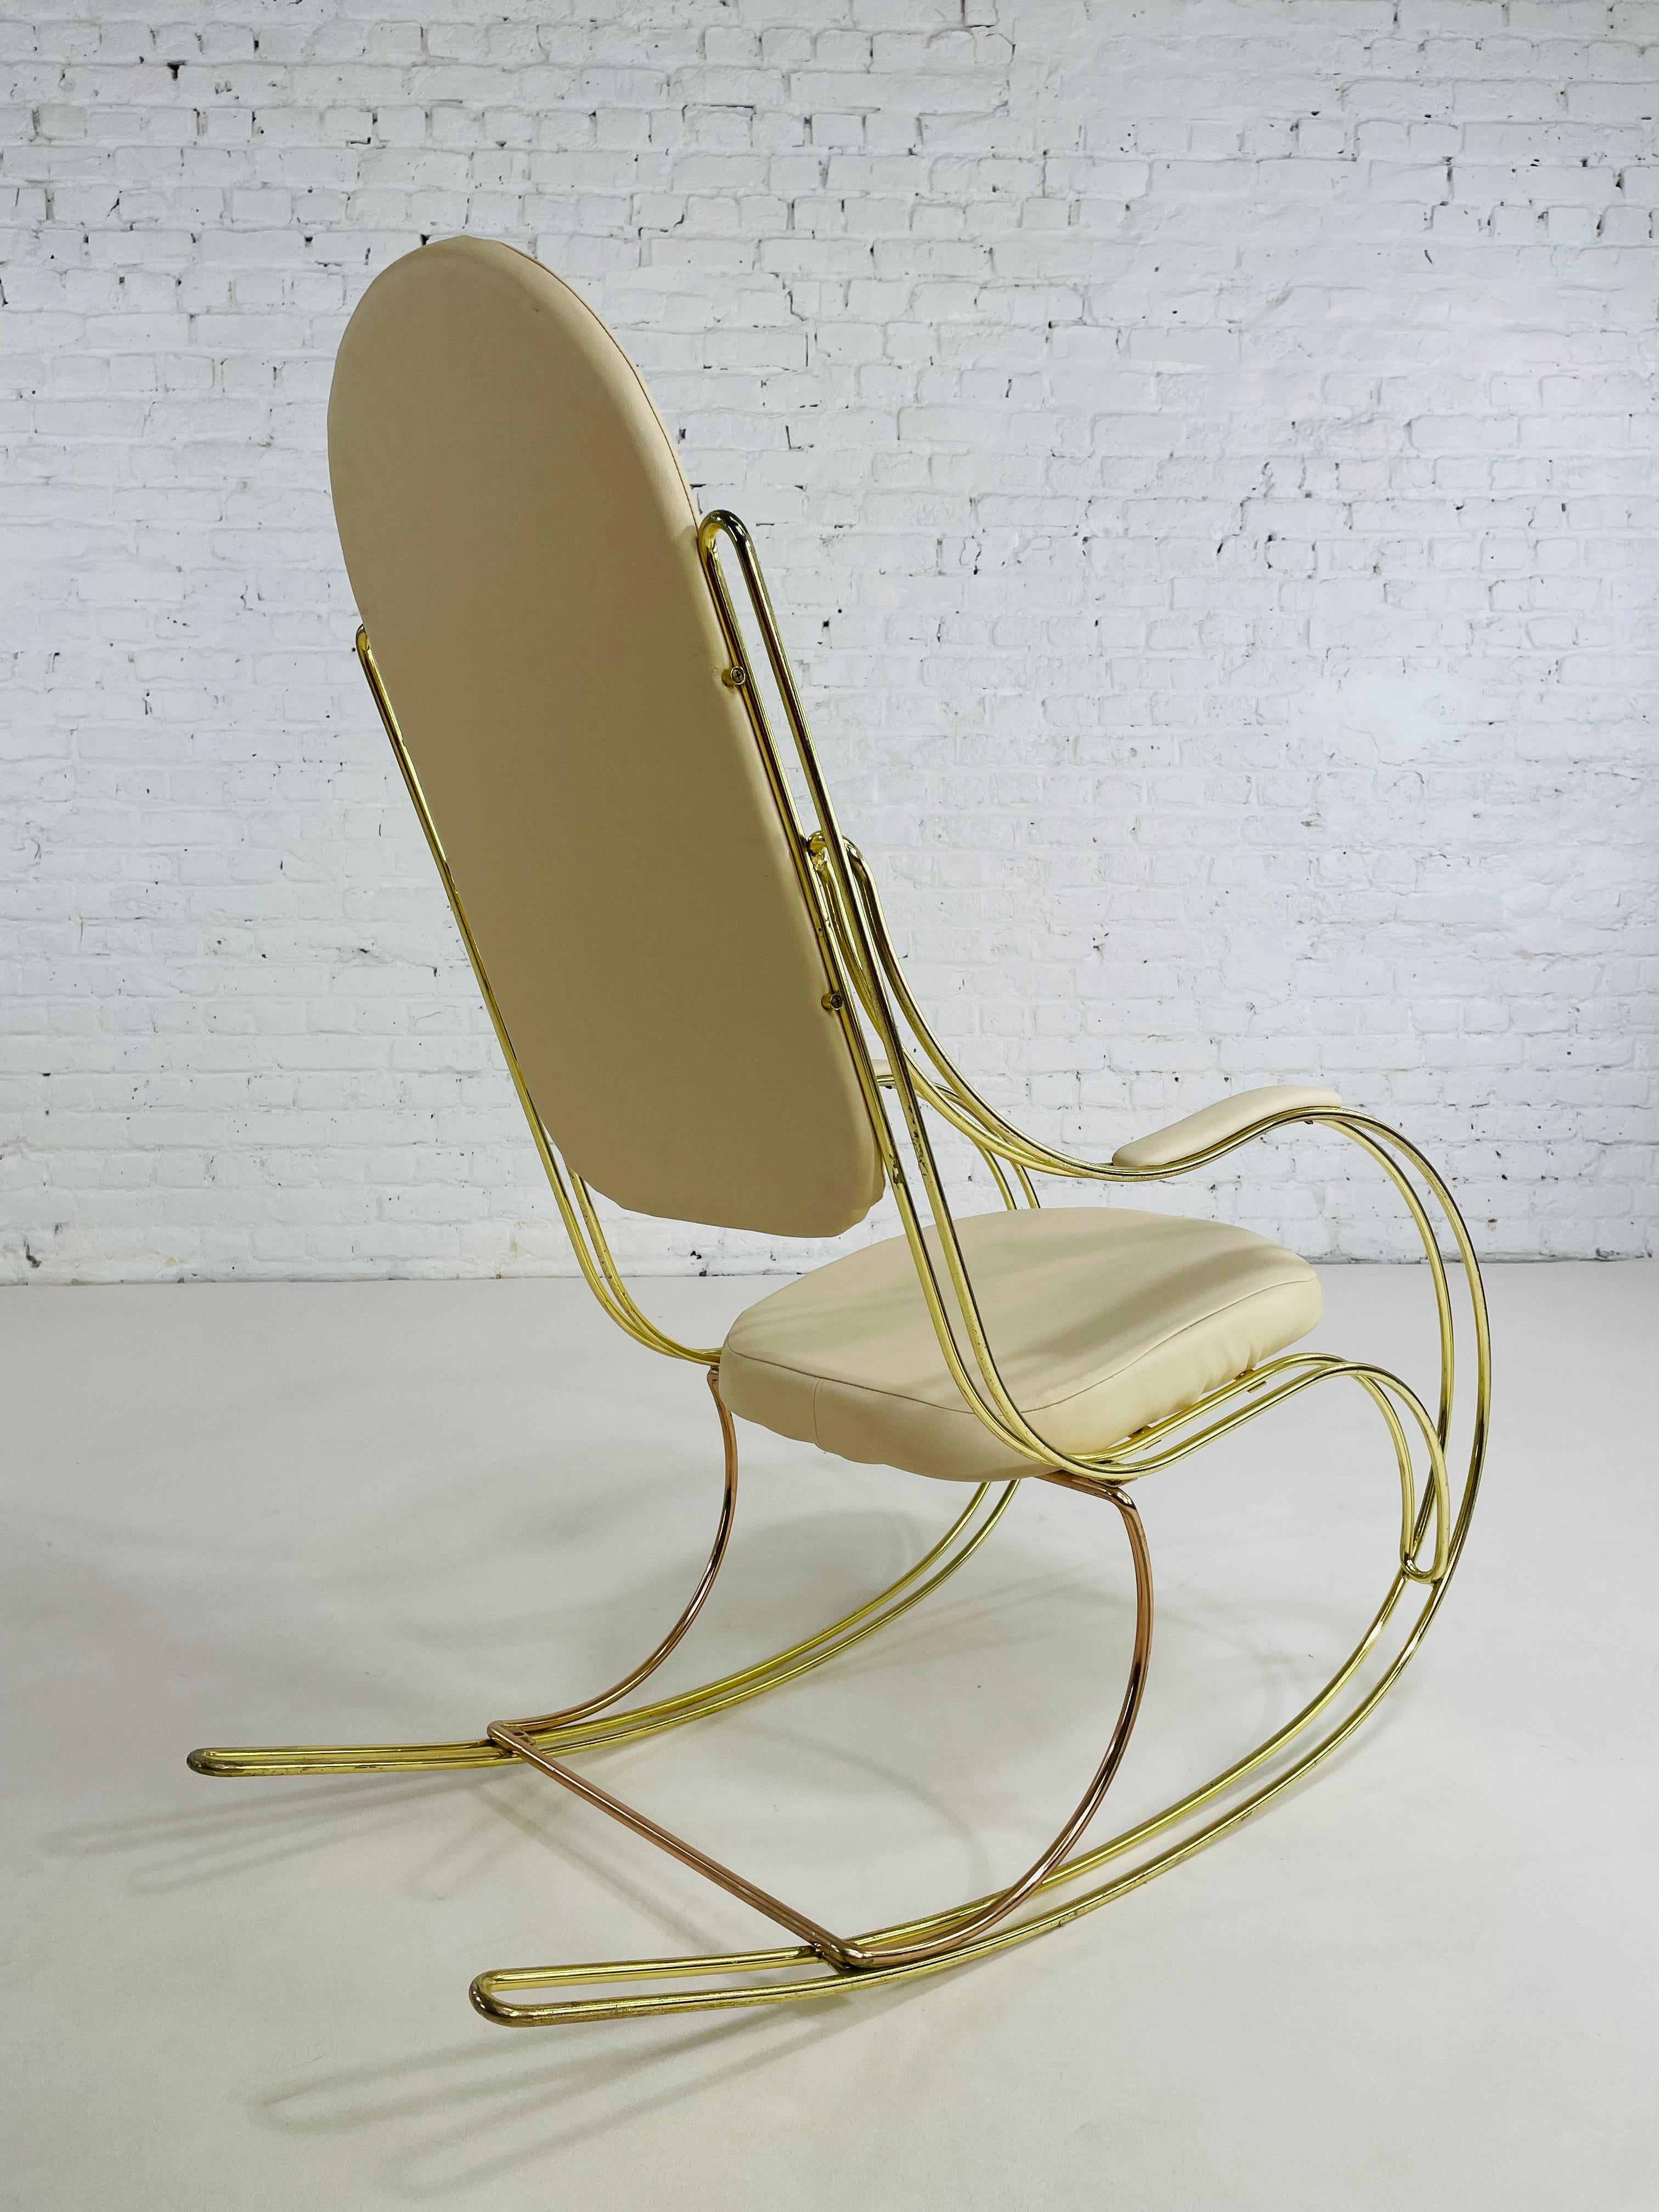 1960s-1970s Brass And Beige Faux Leather Rocking Chair For Sale 2